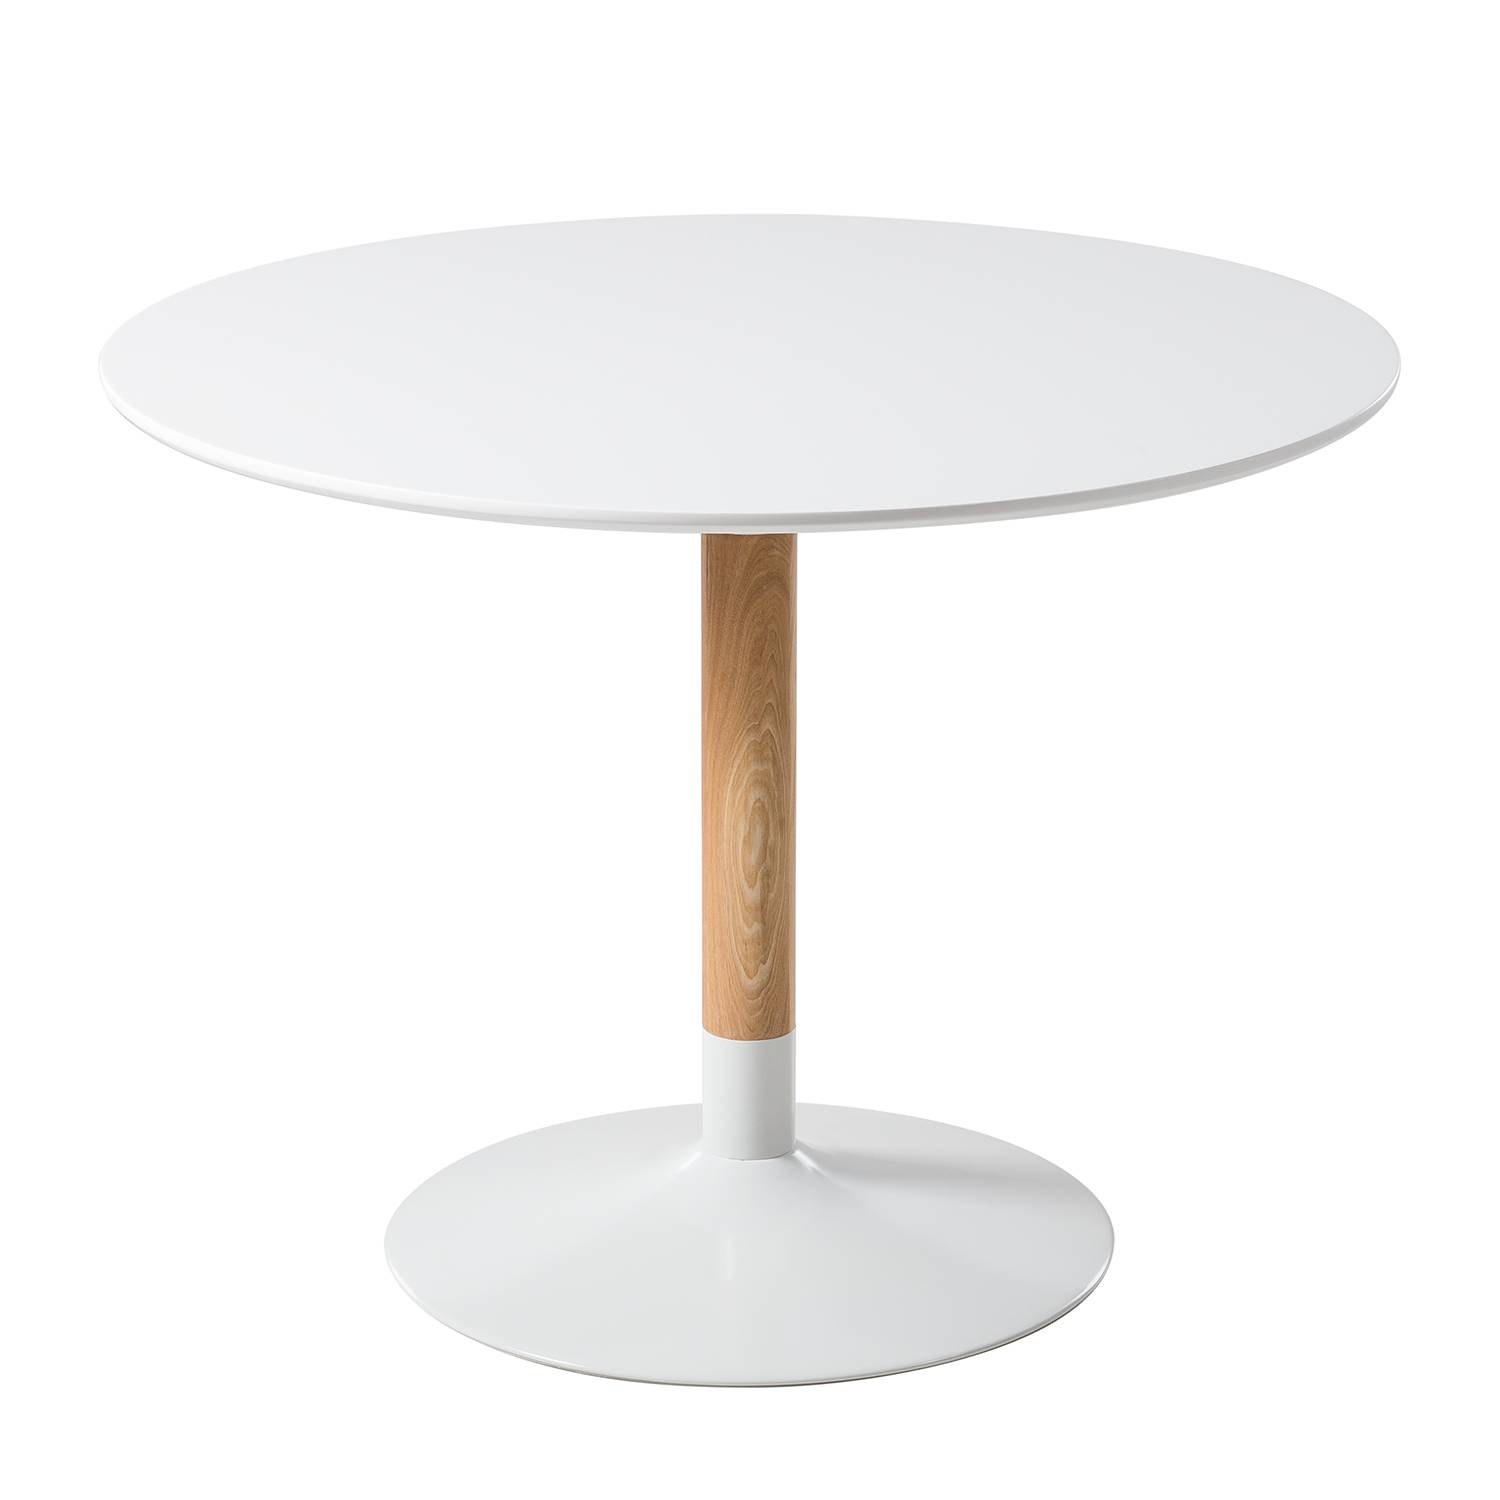 Image of Table Laud 000000001000123744